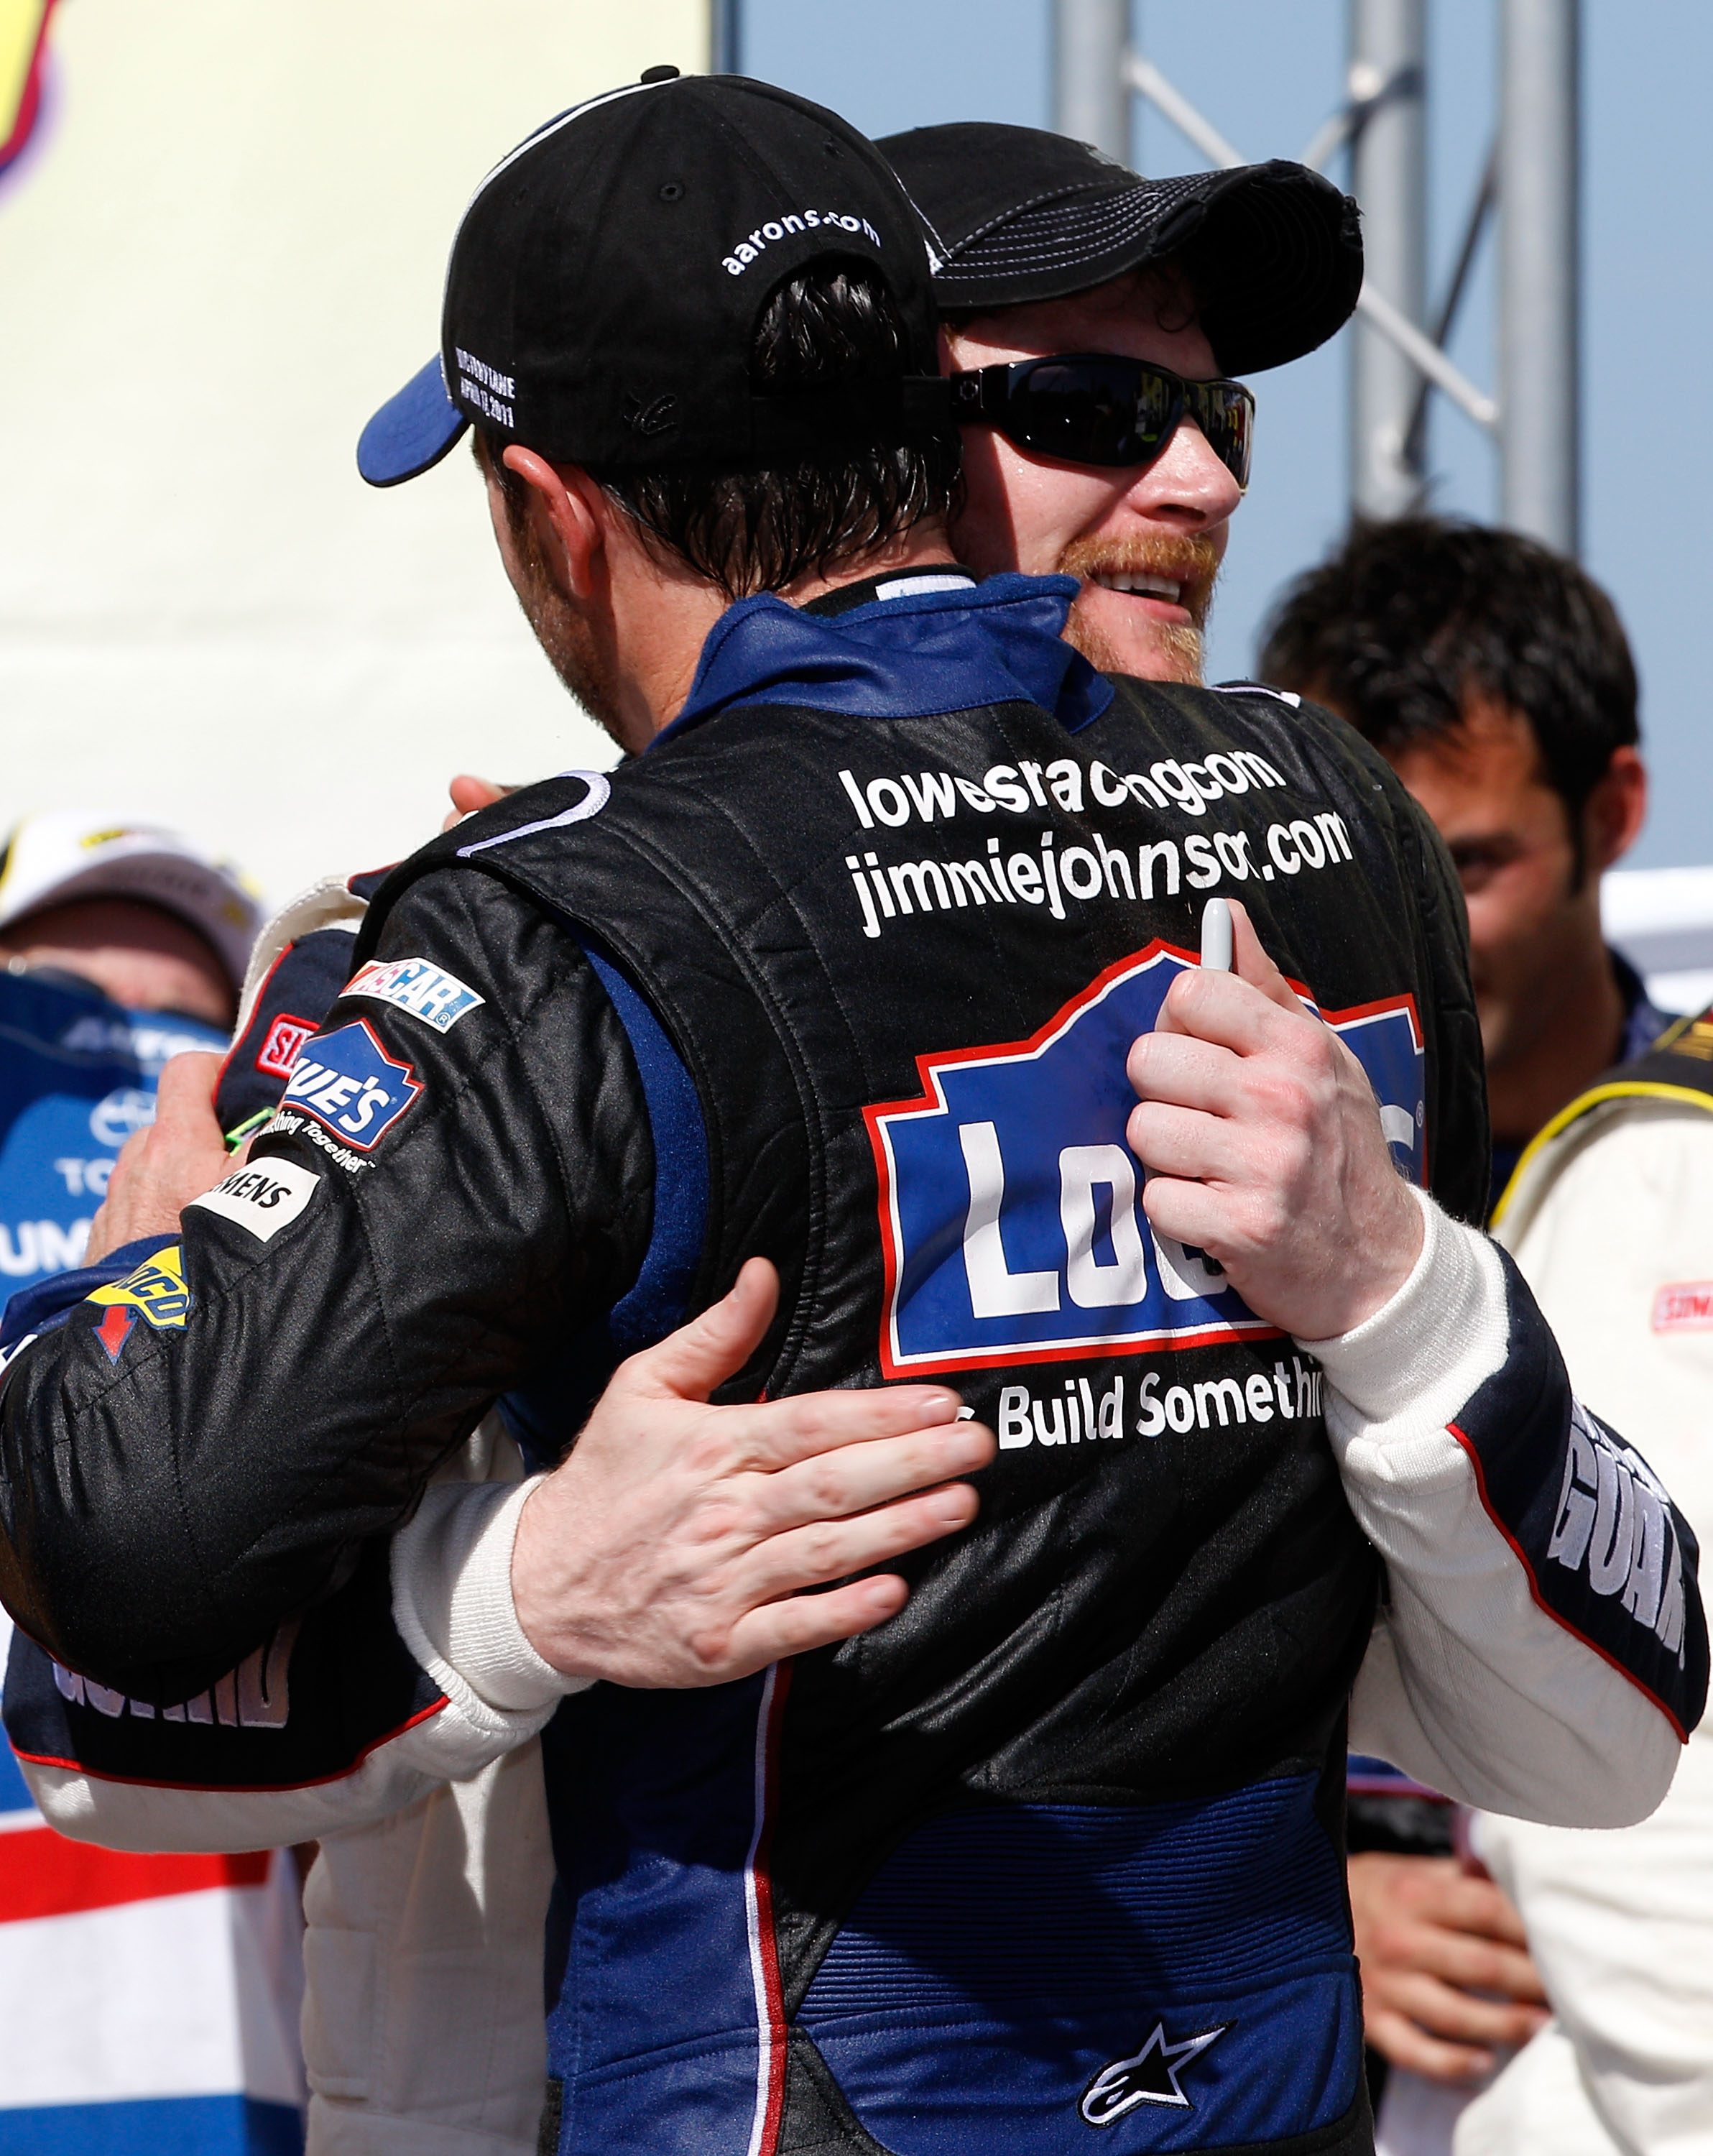 TALLADEGA, AL - APRIL 17:  Jimmie Johnson (FRONT), driver of the #48 Lowe's Chevrolet, hugs teammates Dale Earnhardt Jr. (BACK), driver of the #88 National Guard/Amp Energy Chevrolet, in Victory Lane after winning the NASCAR Sprint Cup Series Aaron's 499